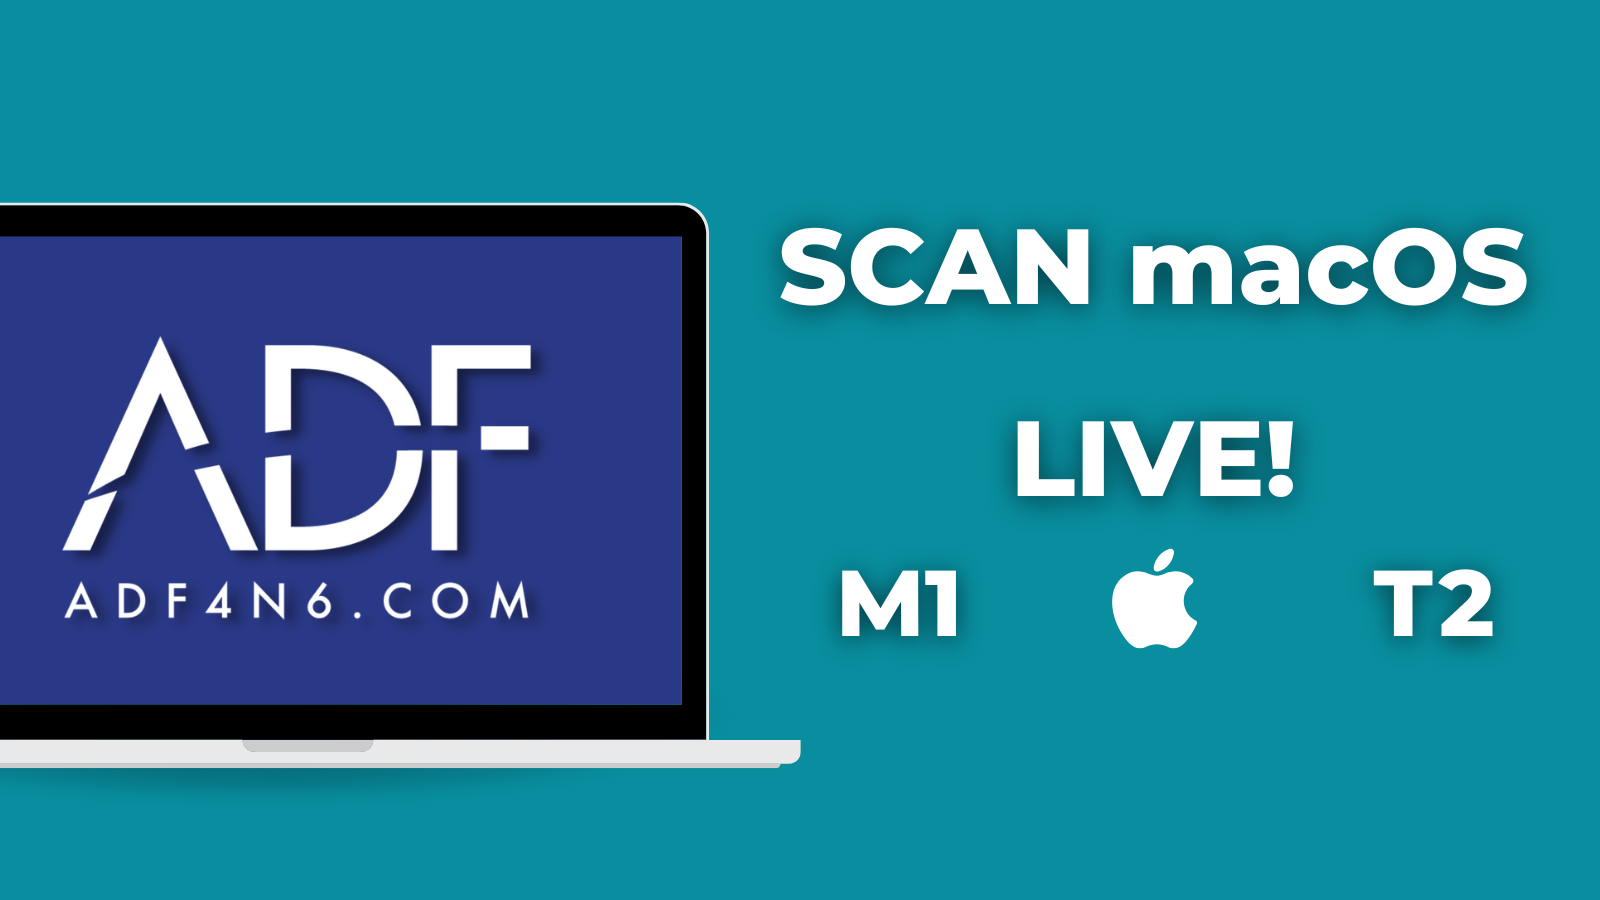 macOS Forensics: Live Scan Macs with T2 or M1 chips